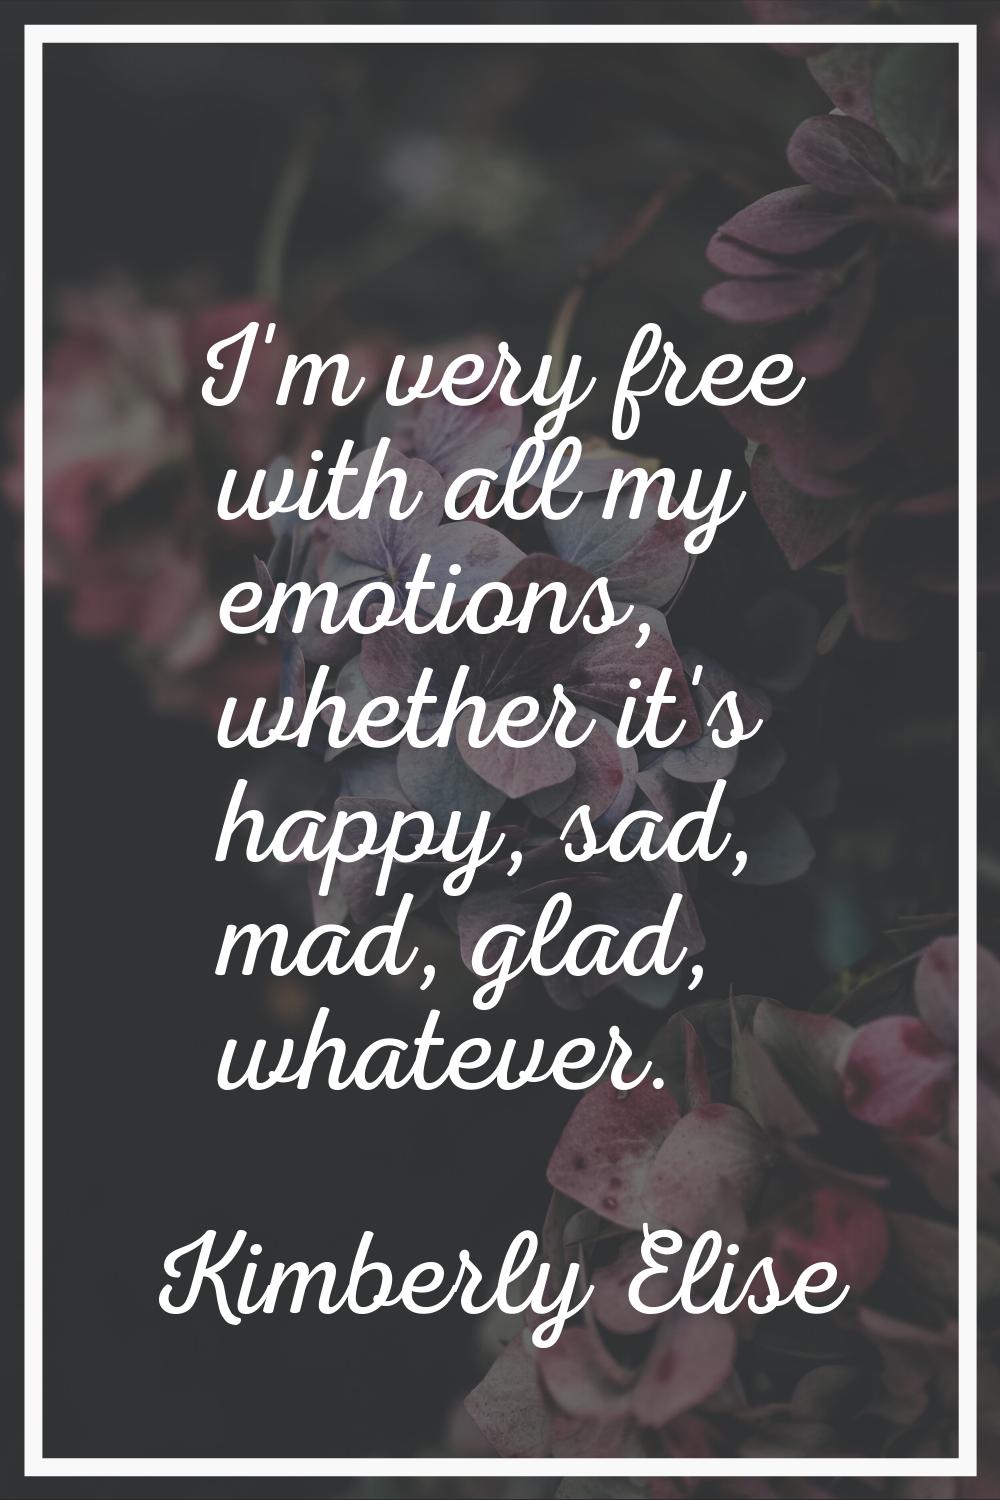 I'm very free with all my emotions, whether it's happy, sad, mad, glad, whatever.